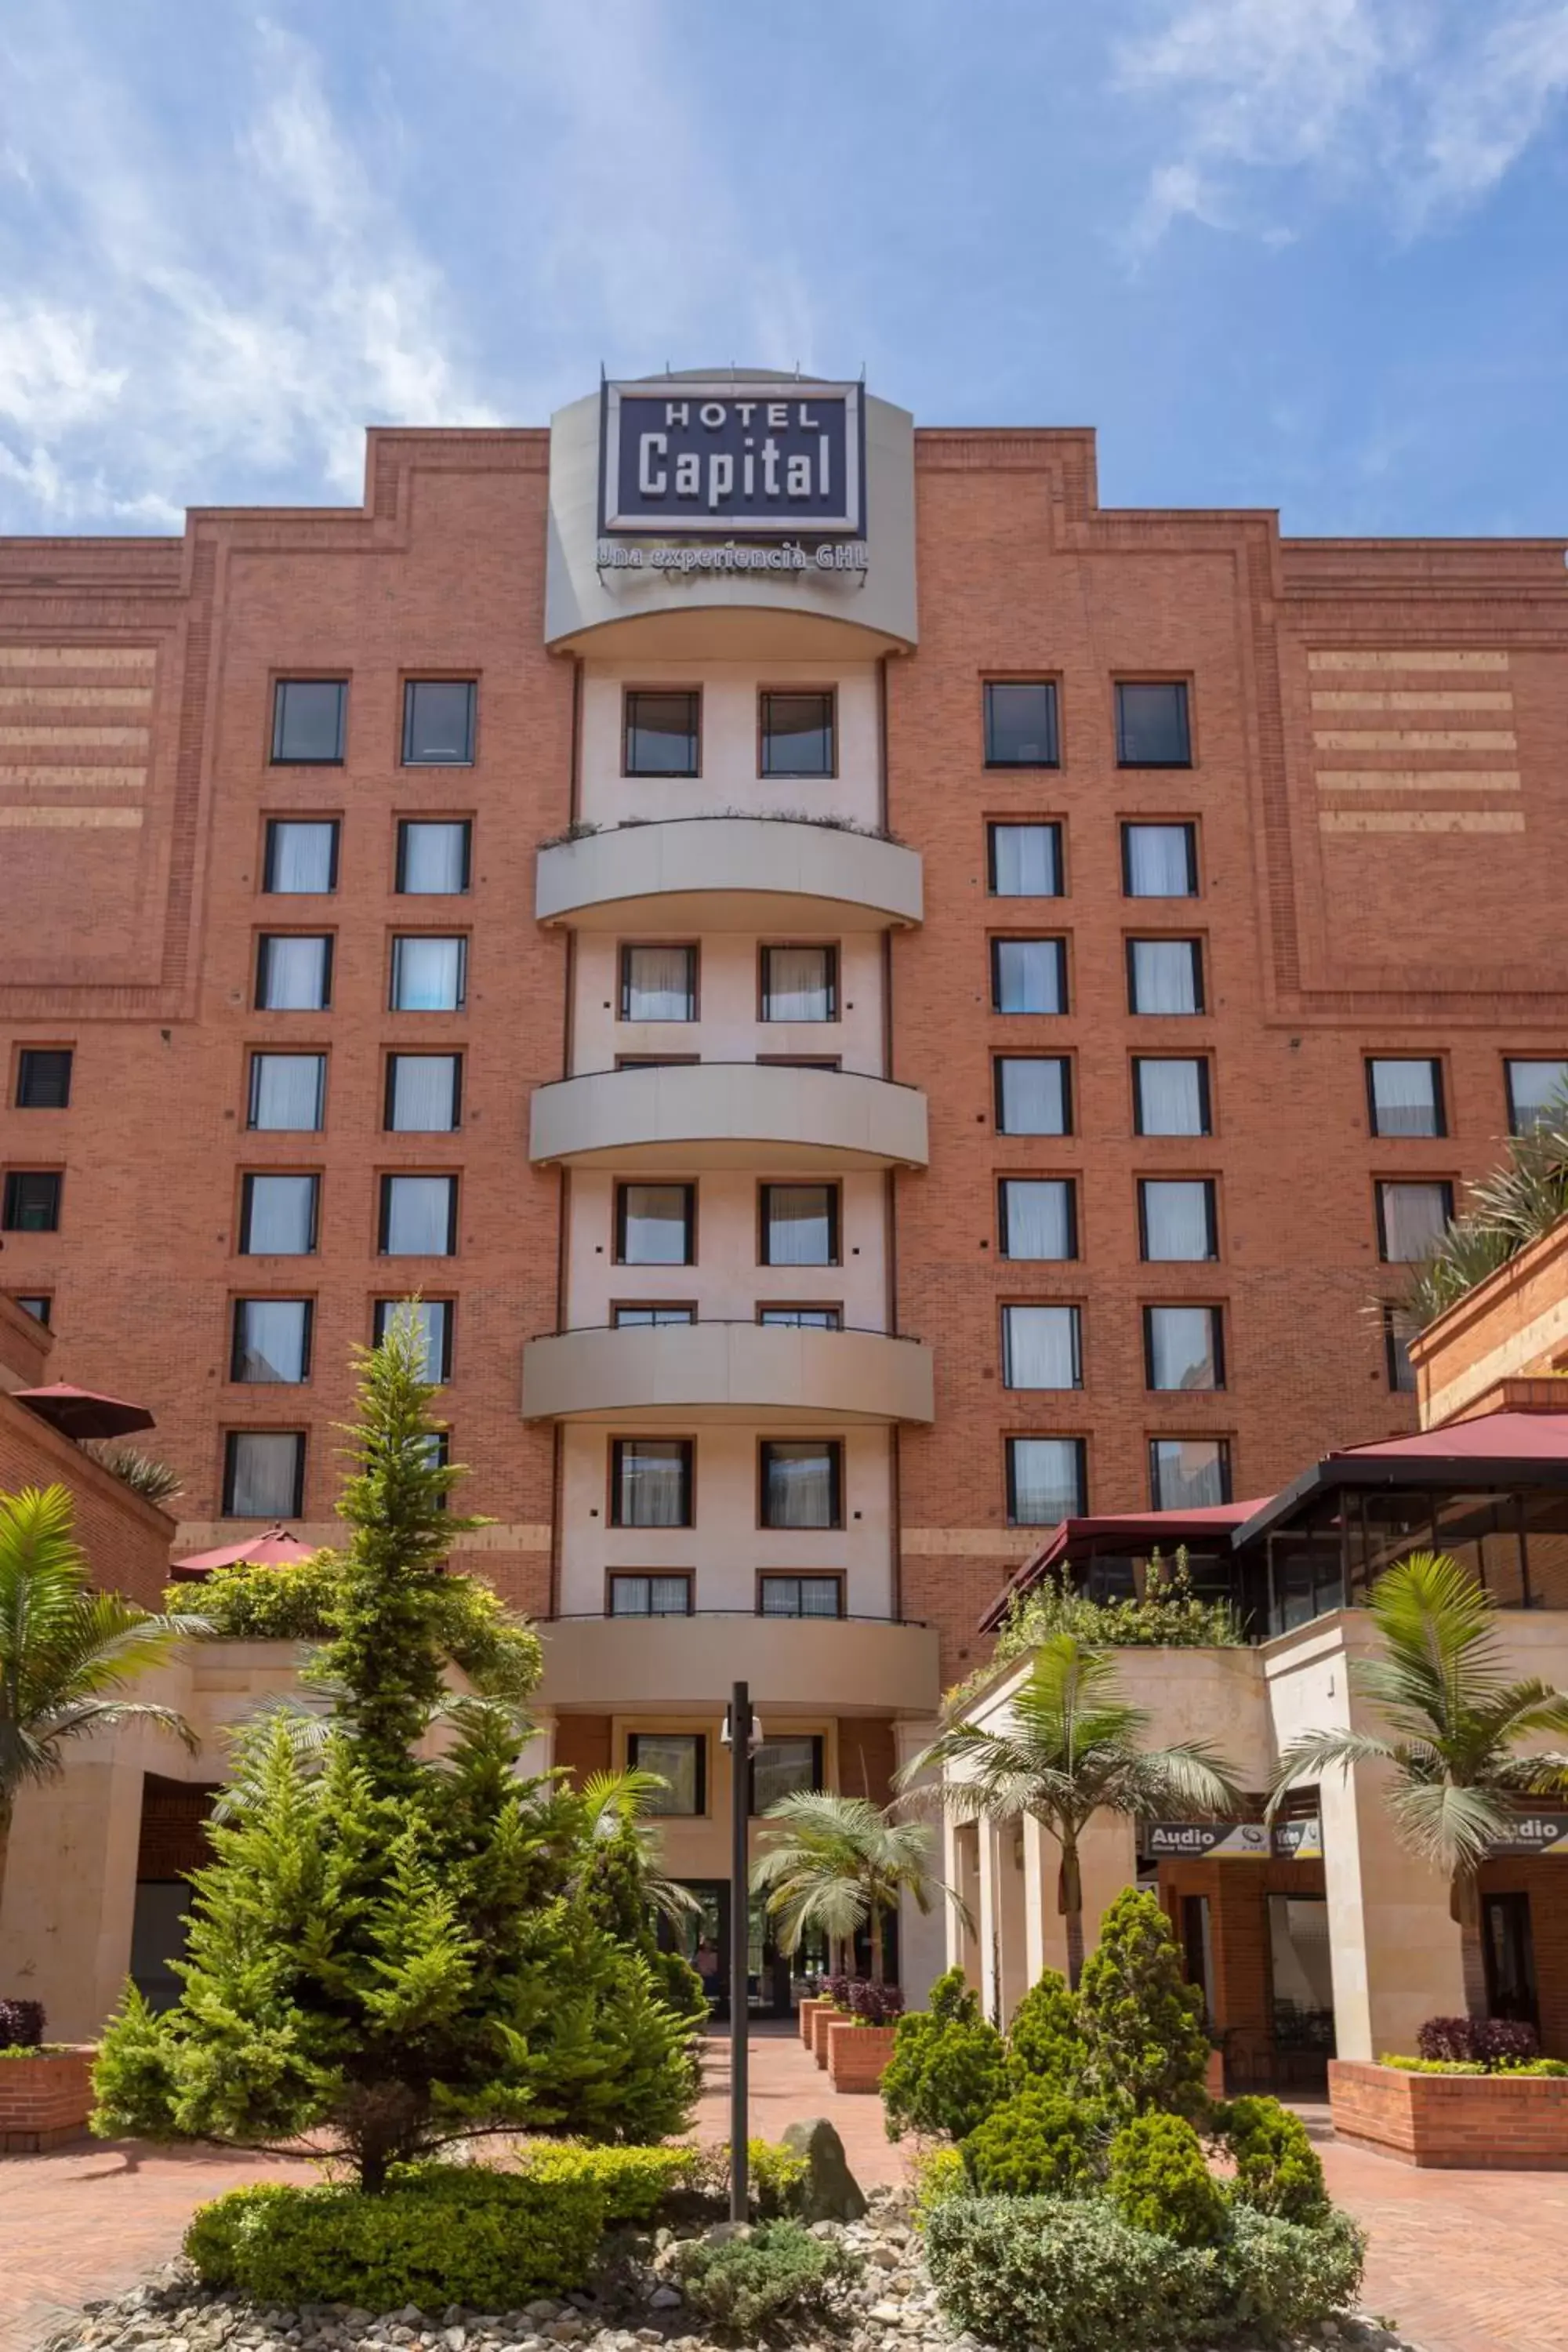 Property building in GHL Hotel Capital